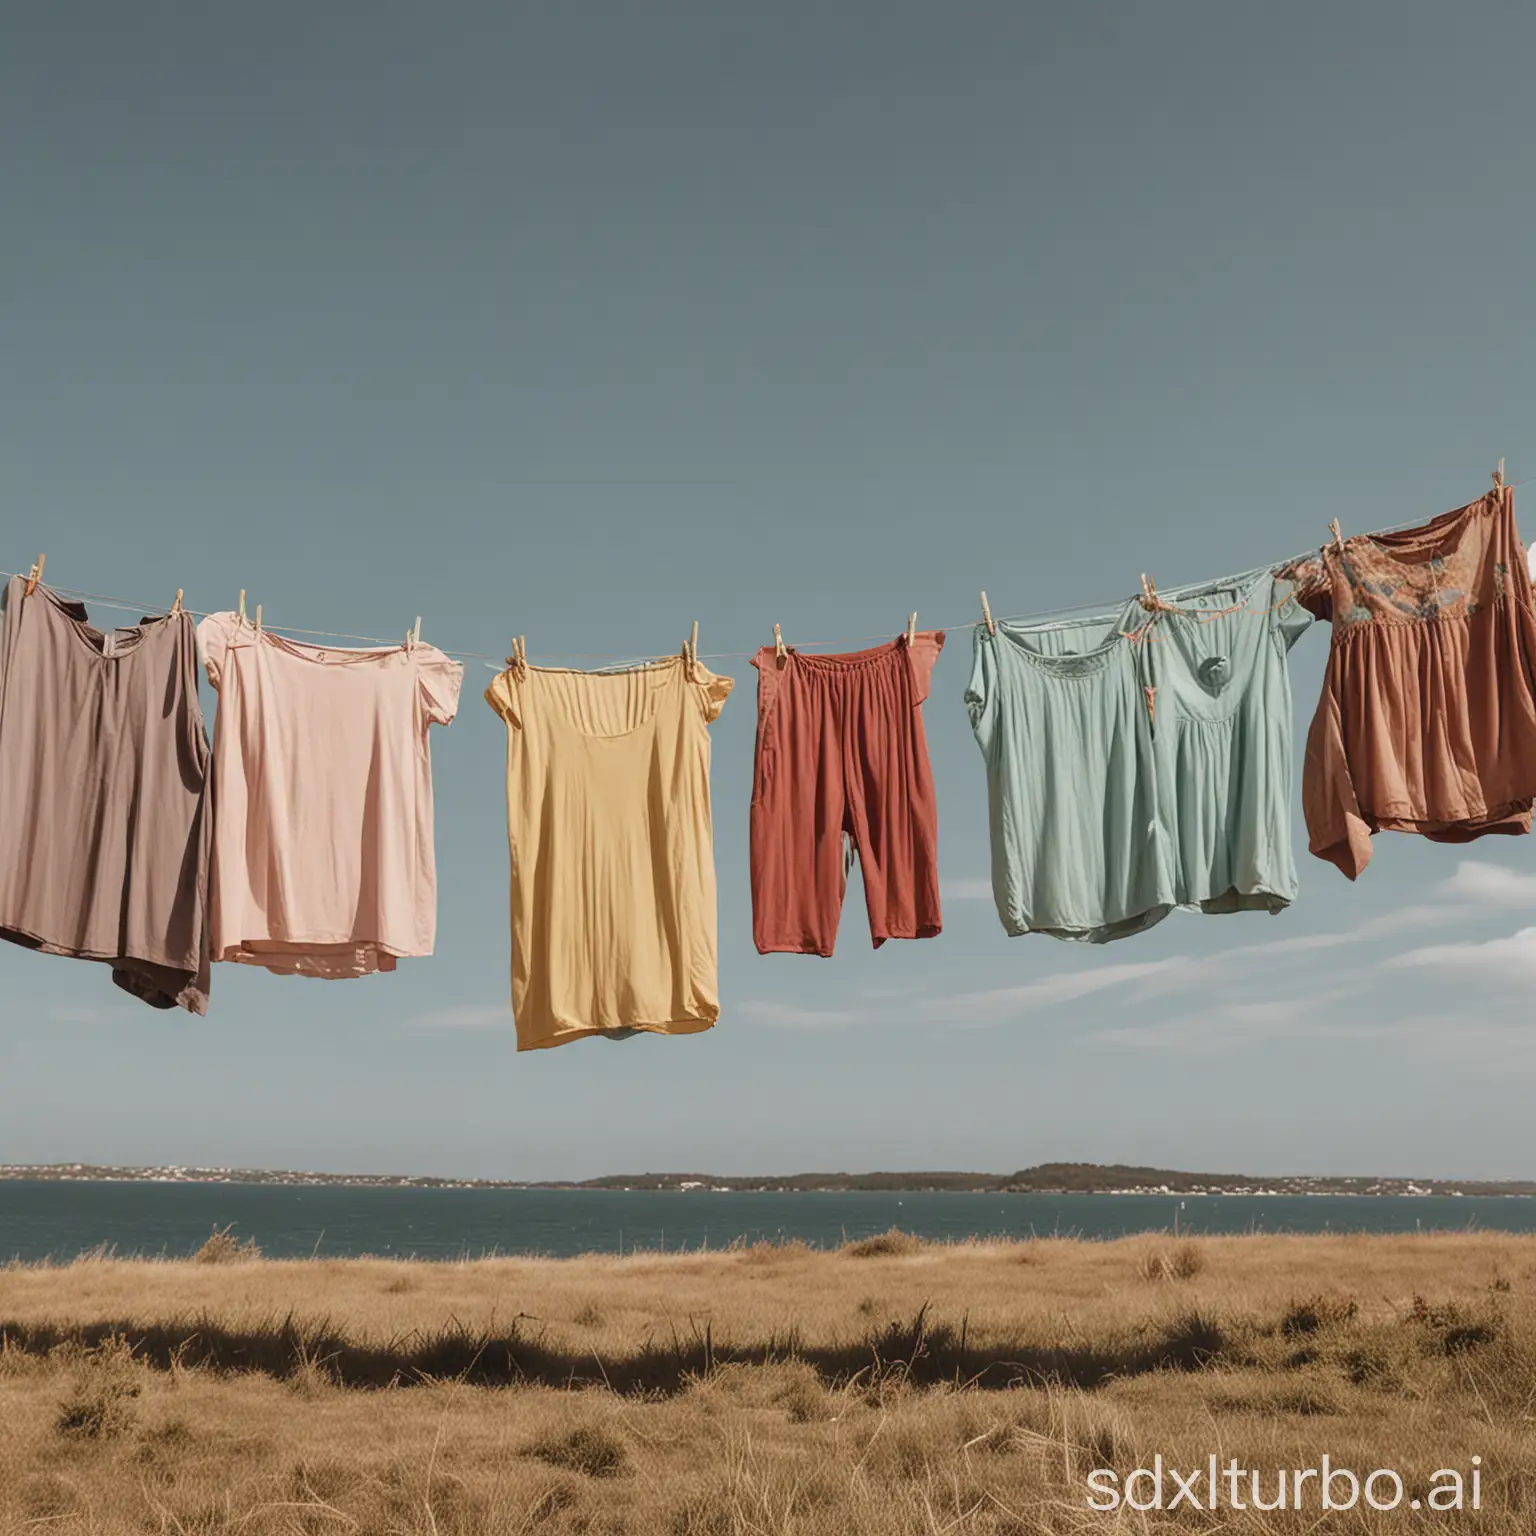 Vibrant-Clothesline-Colorful-Fabrics-Blowing-in-the-Wind